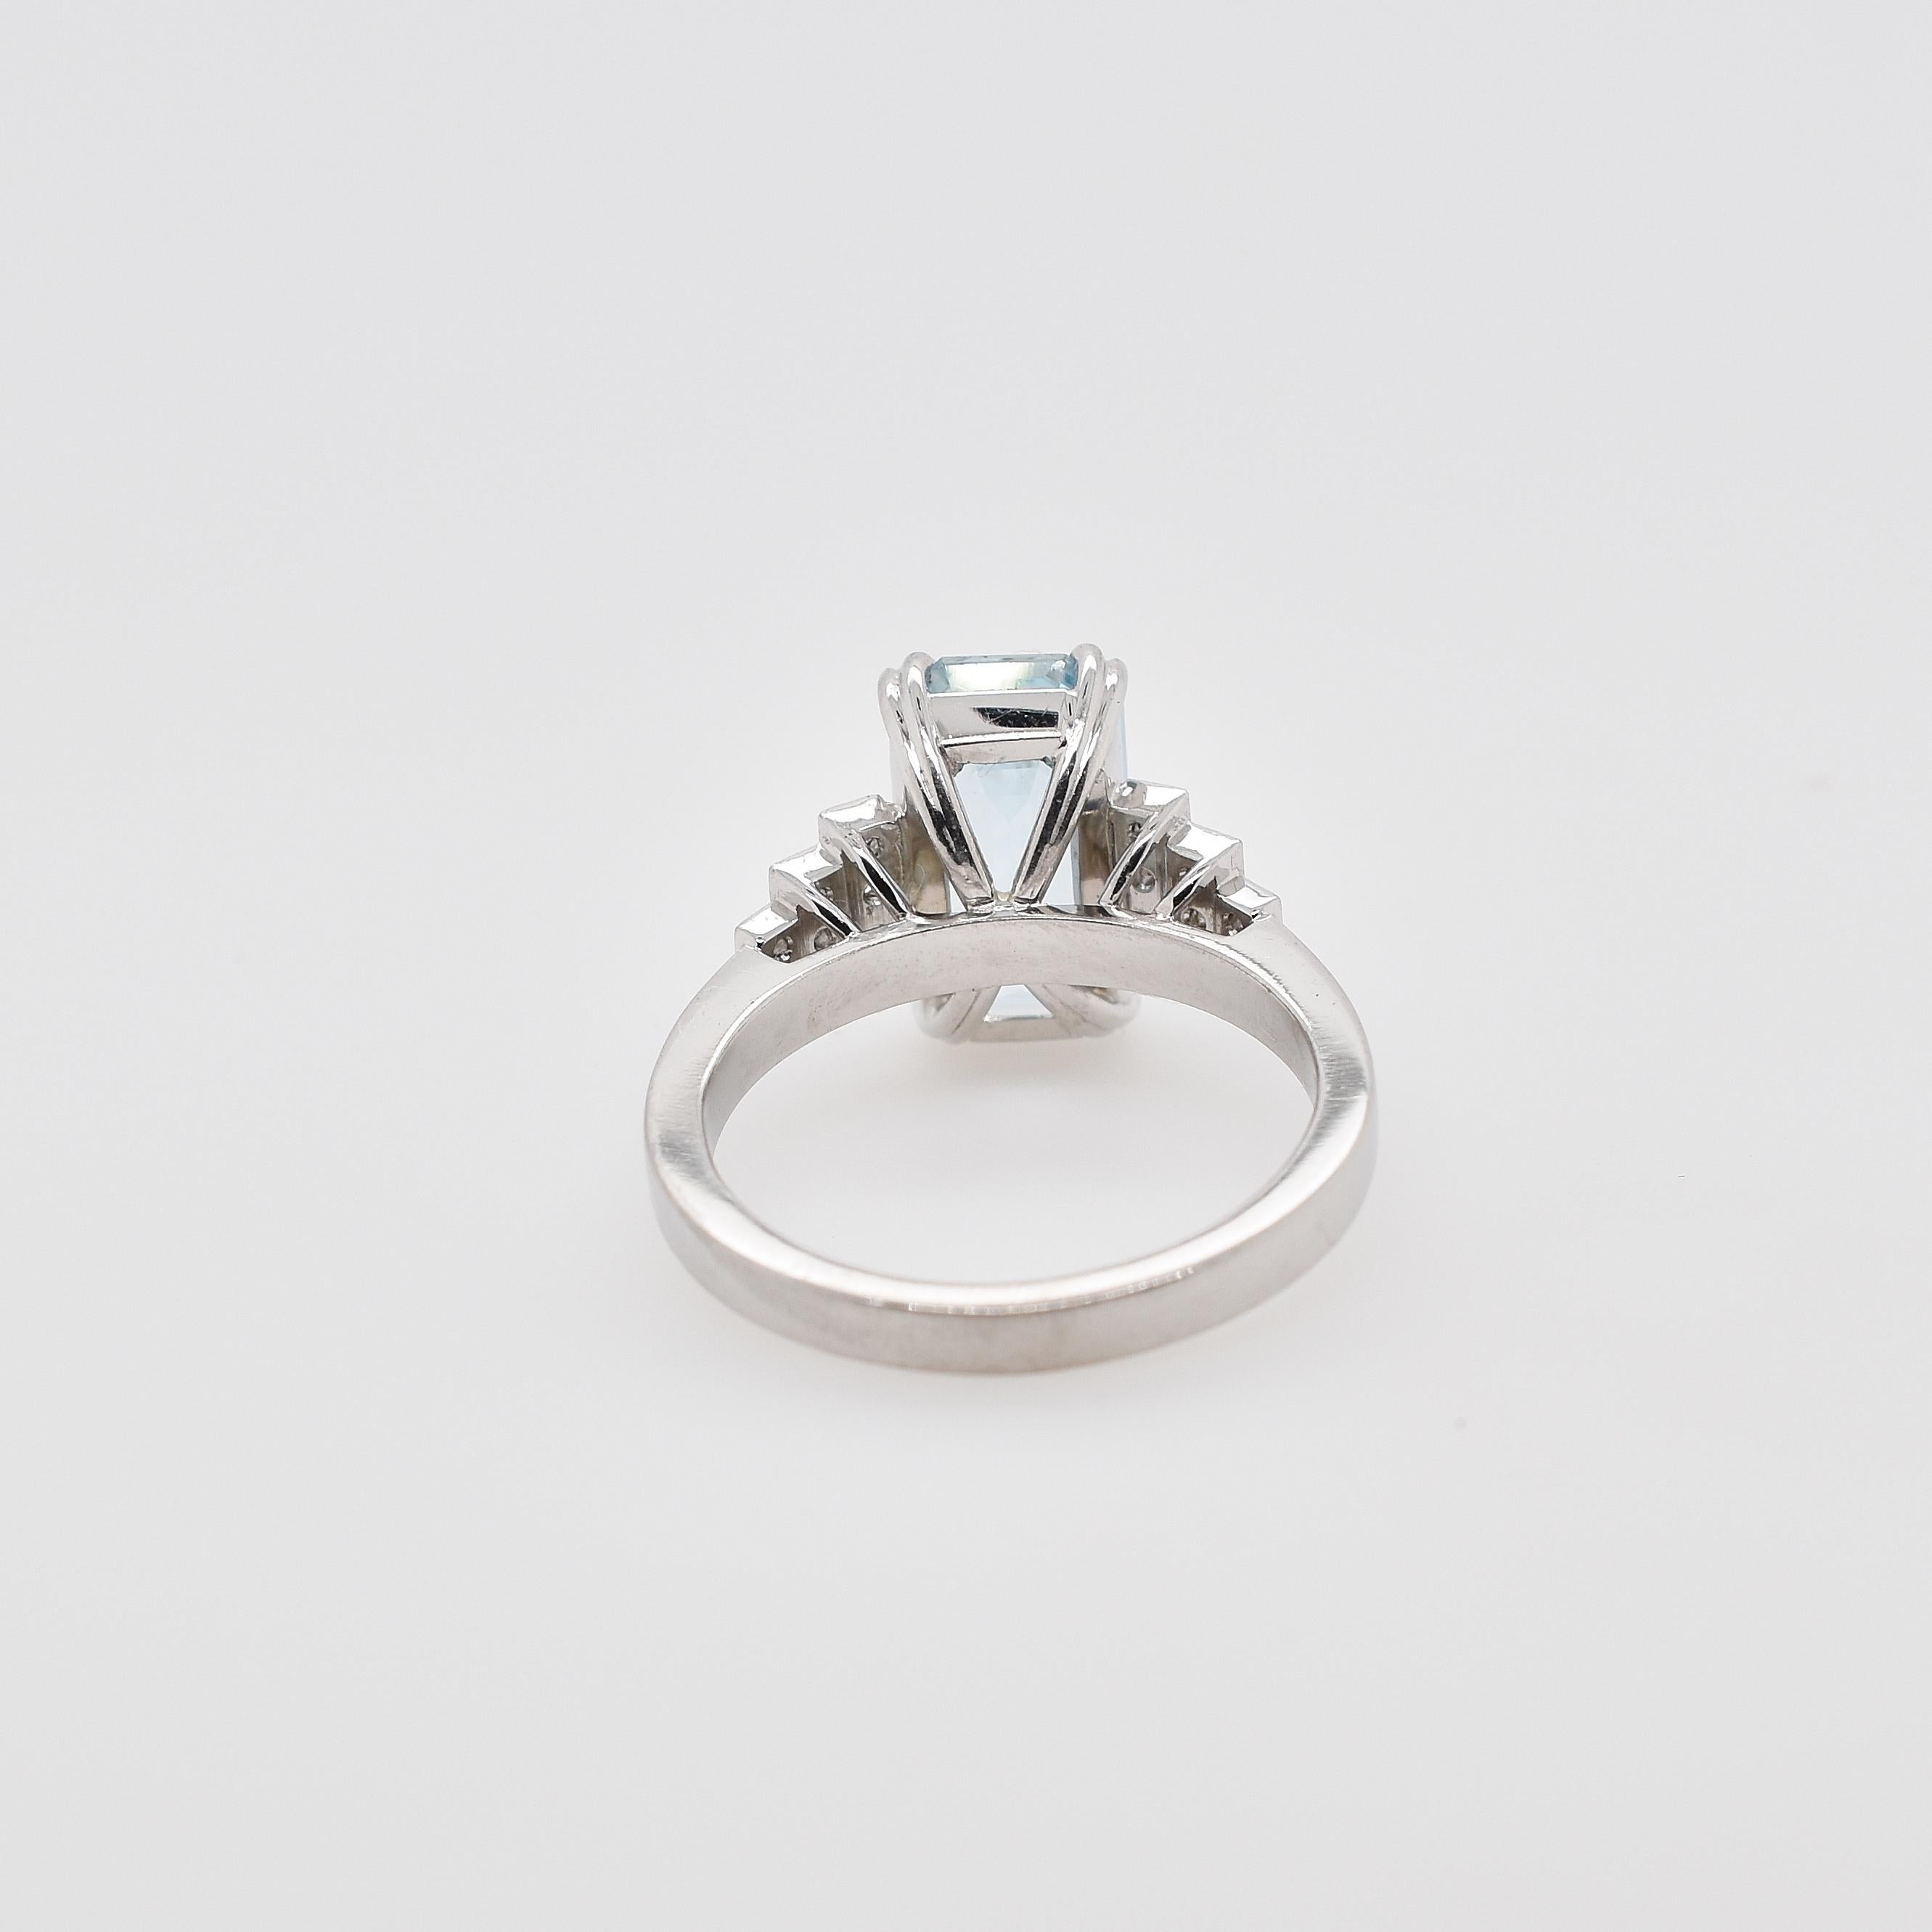 18ct white gold emerald cut aquamarine and brilliant cut diamond ring. The aquamarine is 3.26ct and is set in 4 double claws while the 18 diamonds are grain set as stepped shoulders. 18 round brilliant diamonds totalling 0.17ct D-F VS-SI
ring size -